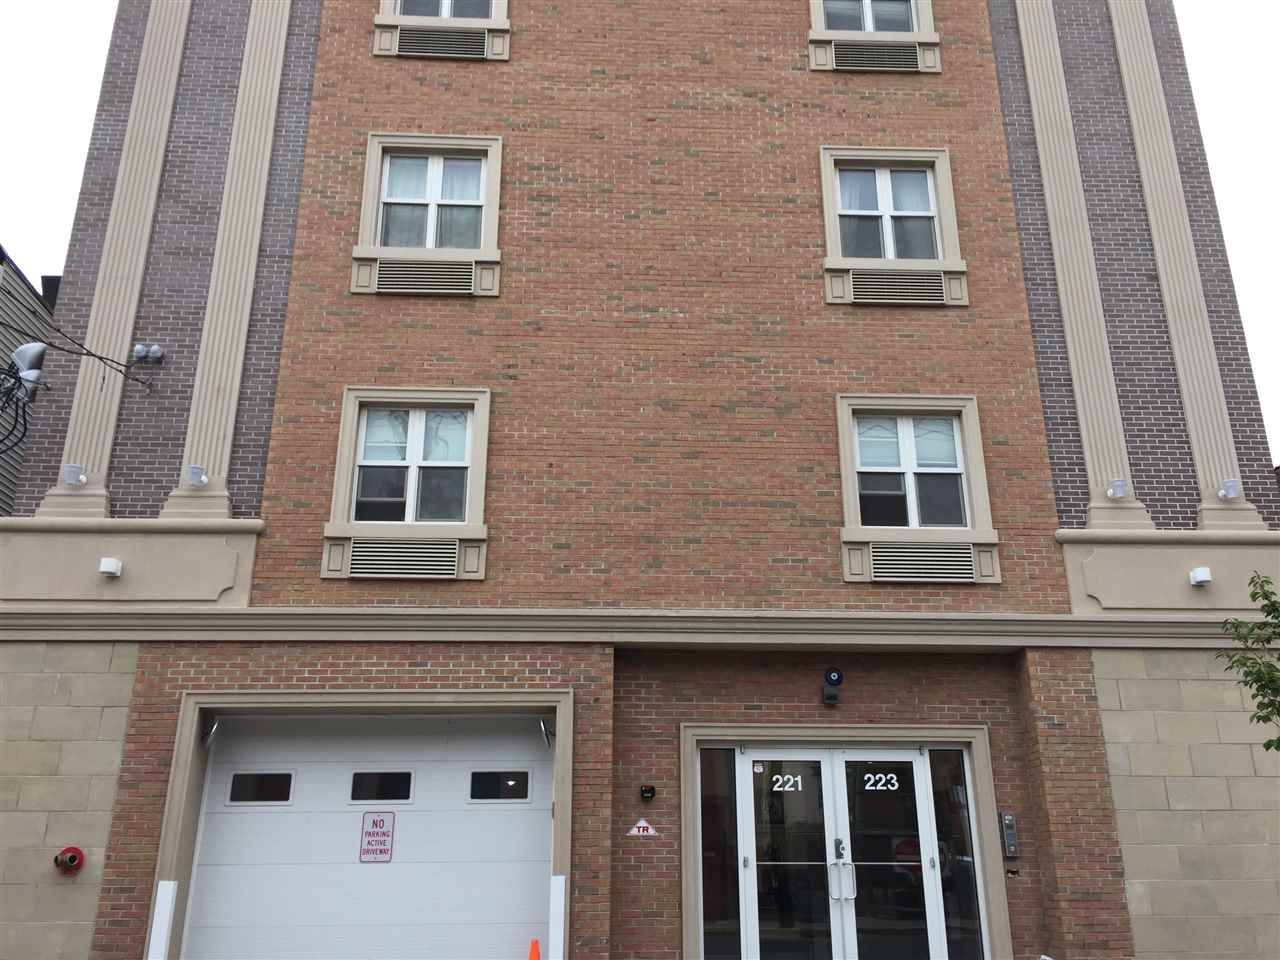 Rental Community in the Heart of Hudson County - 1 BR New Jersey